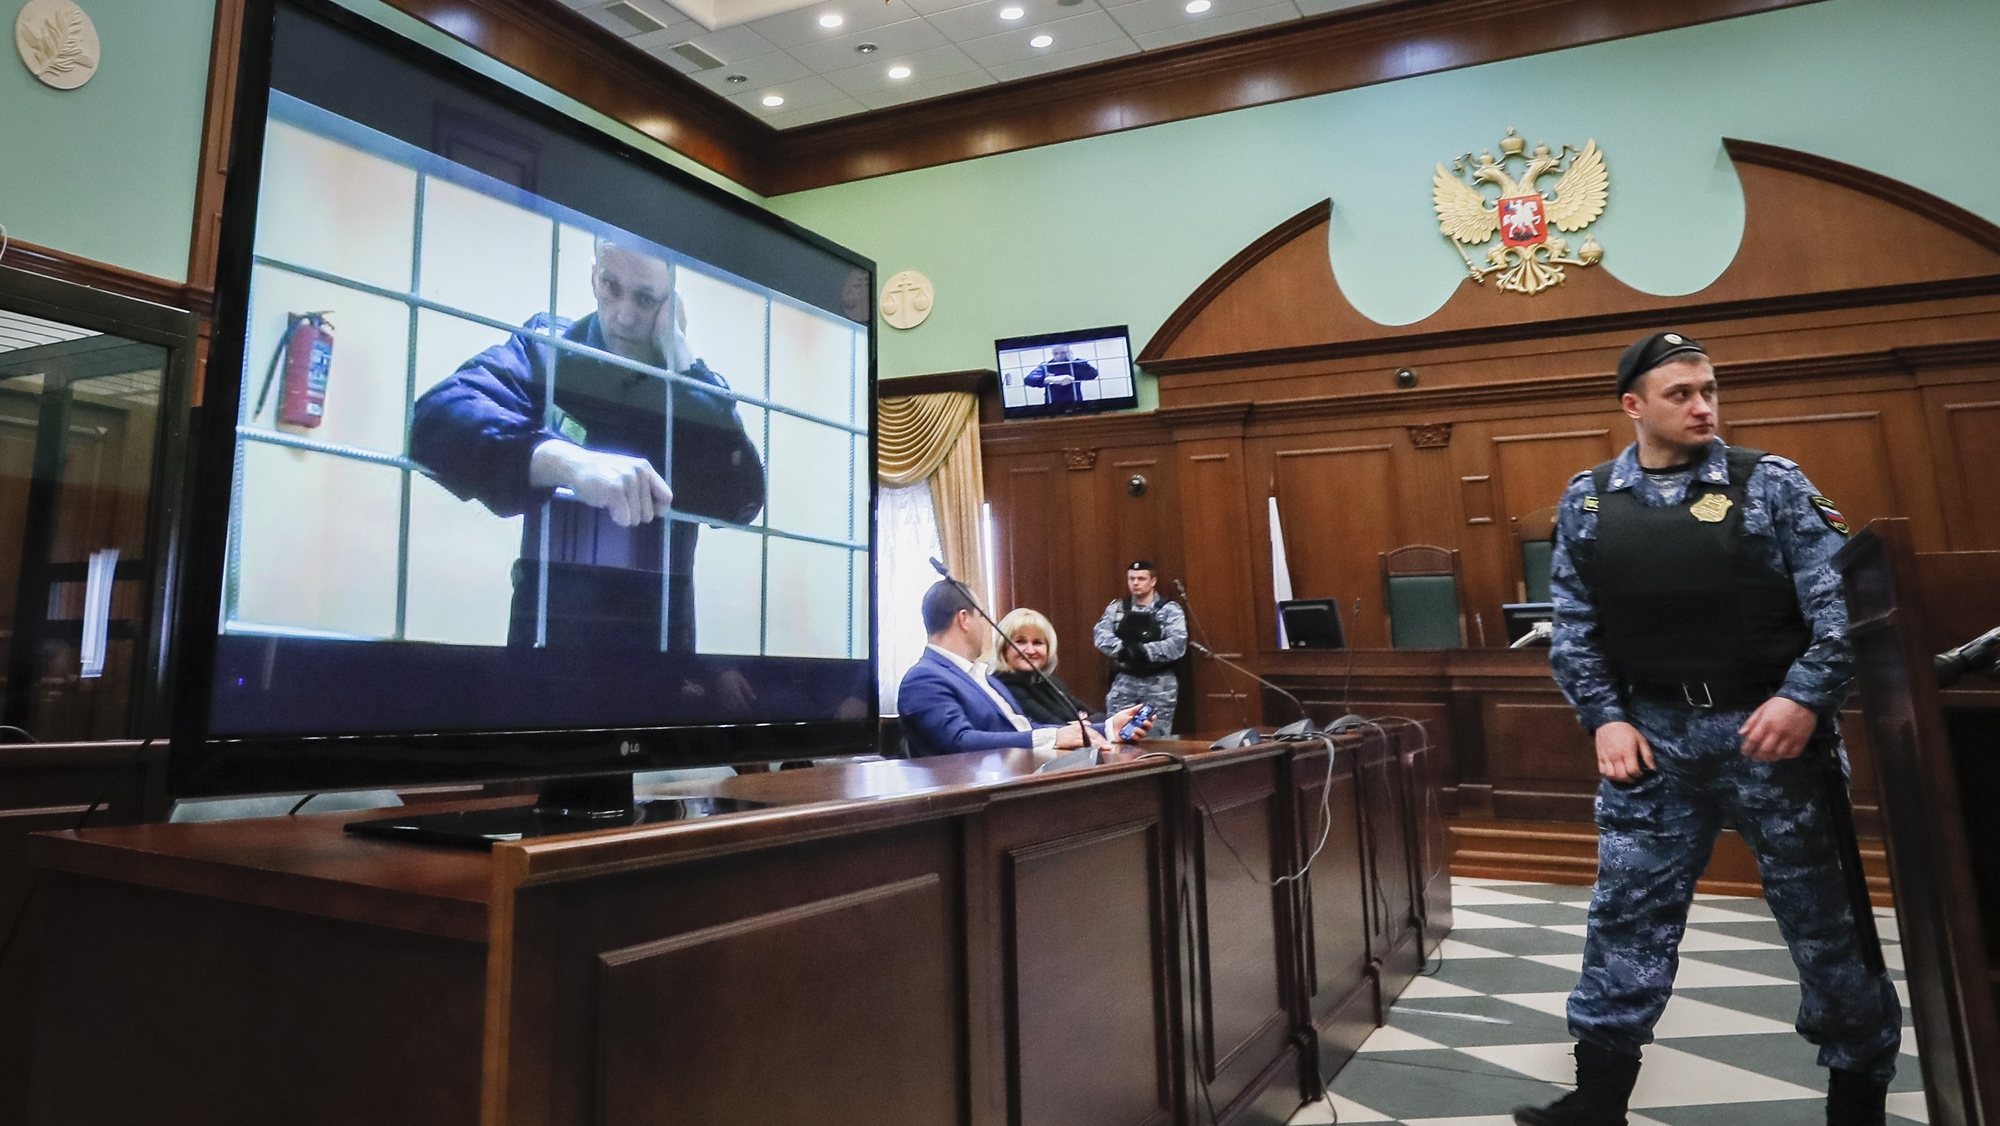 epa10481401 (FILE) - Russian opposition leader Alexei Navalny is shown on a monitor screen via video link from the penal colony No. 2 (IK-2) in Pokrov in Vladimir region, during a hearing of an appeal against Lefortovsky court sentence at the Moscow city court in Moscow, Russia, 24 May 2022 (reissued 21 February 2023). Russian troops on 24 February 2022, entered Ukrainian territory, starting a conflict that has provoked destruction and a humanitarian crisis. One year on, fighting continues in many parts of the country.  EPA/YURI KOCHETKOV  ATTENTION: This Image is part of a PHOTO SET